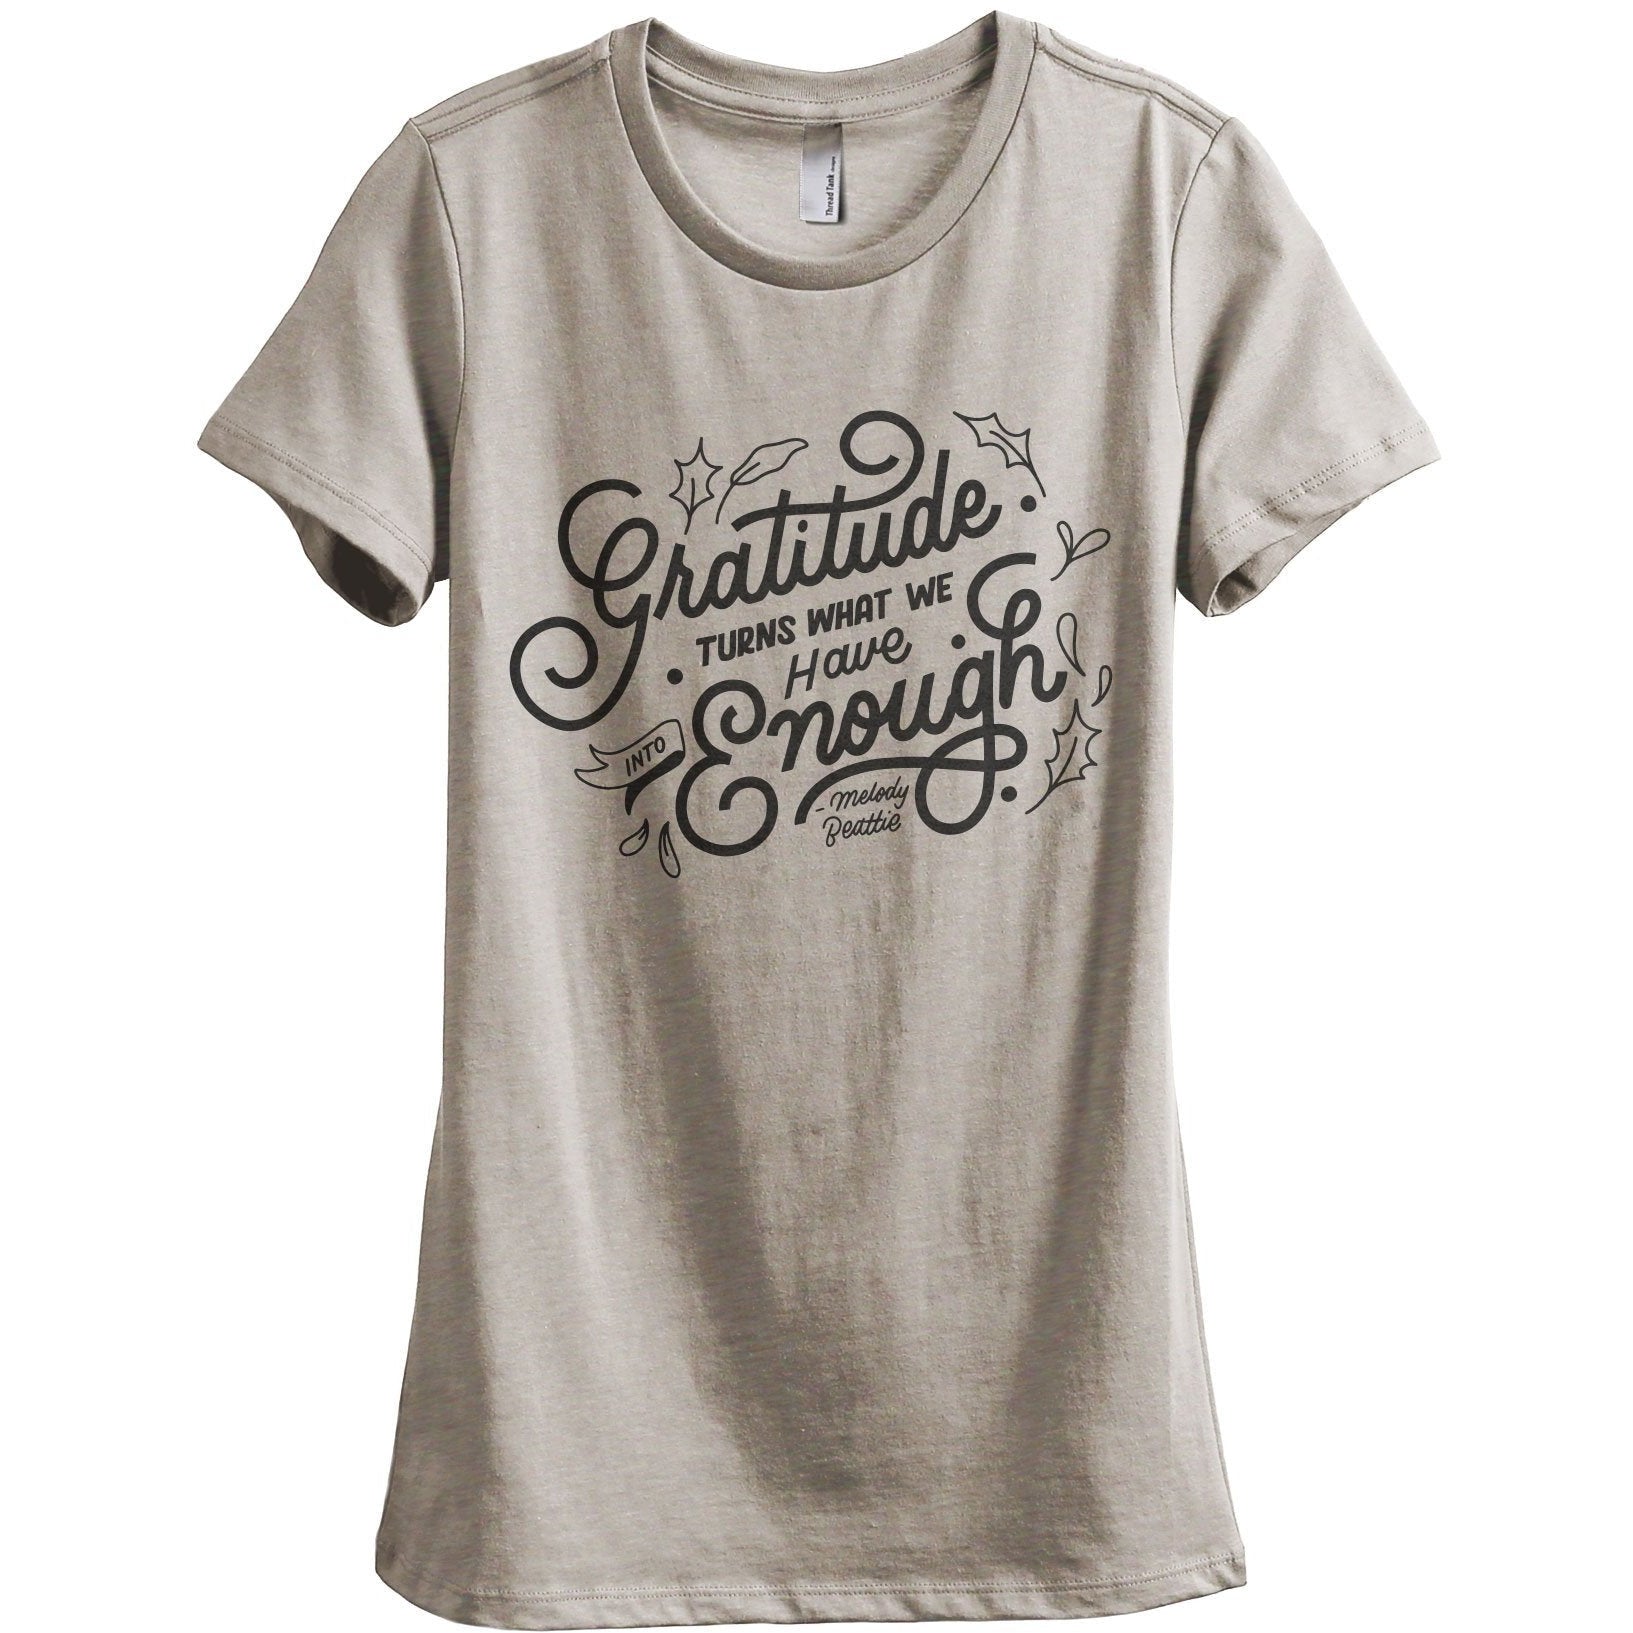 Gratitude Turns What We Have Into Enough Women's Relaxed Crewneck T-Shirt Top Tee Heather Tan Grey
